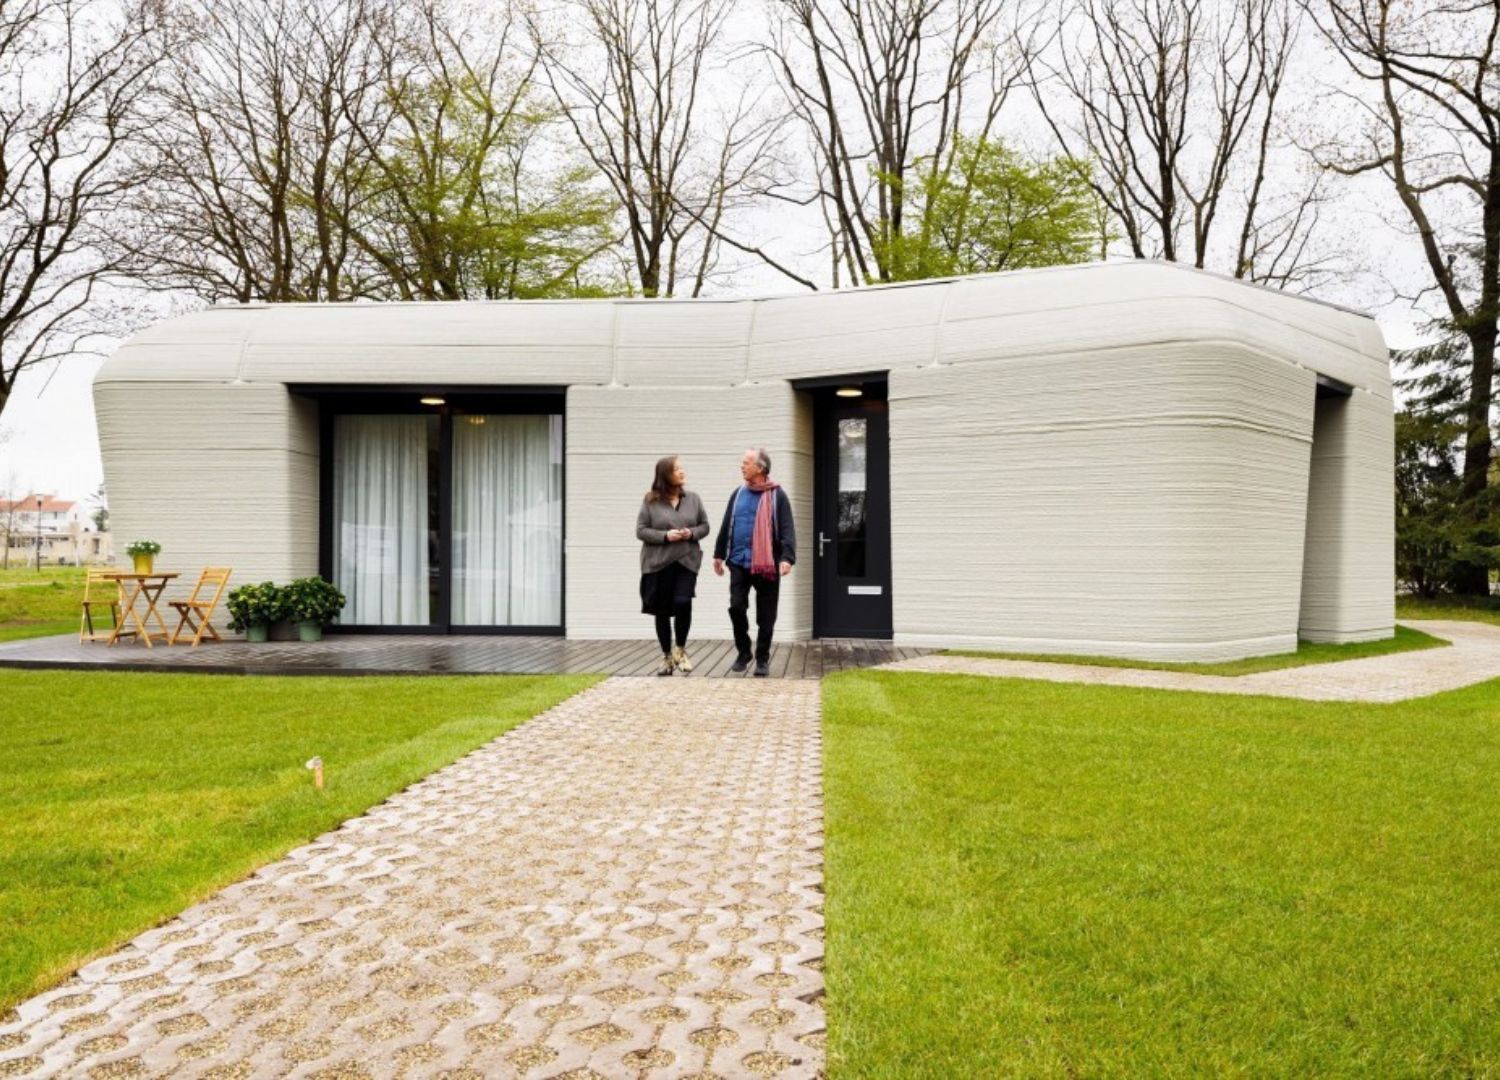 Project Milestone by Dutch architects Houben and Van Mierlo - 3D-printed houses